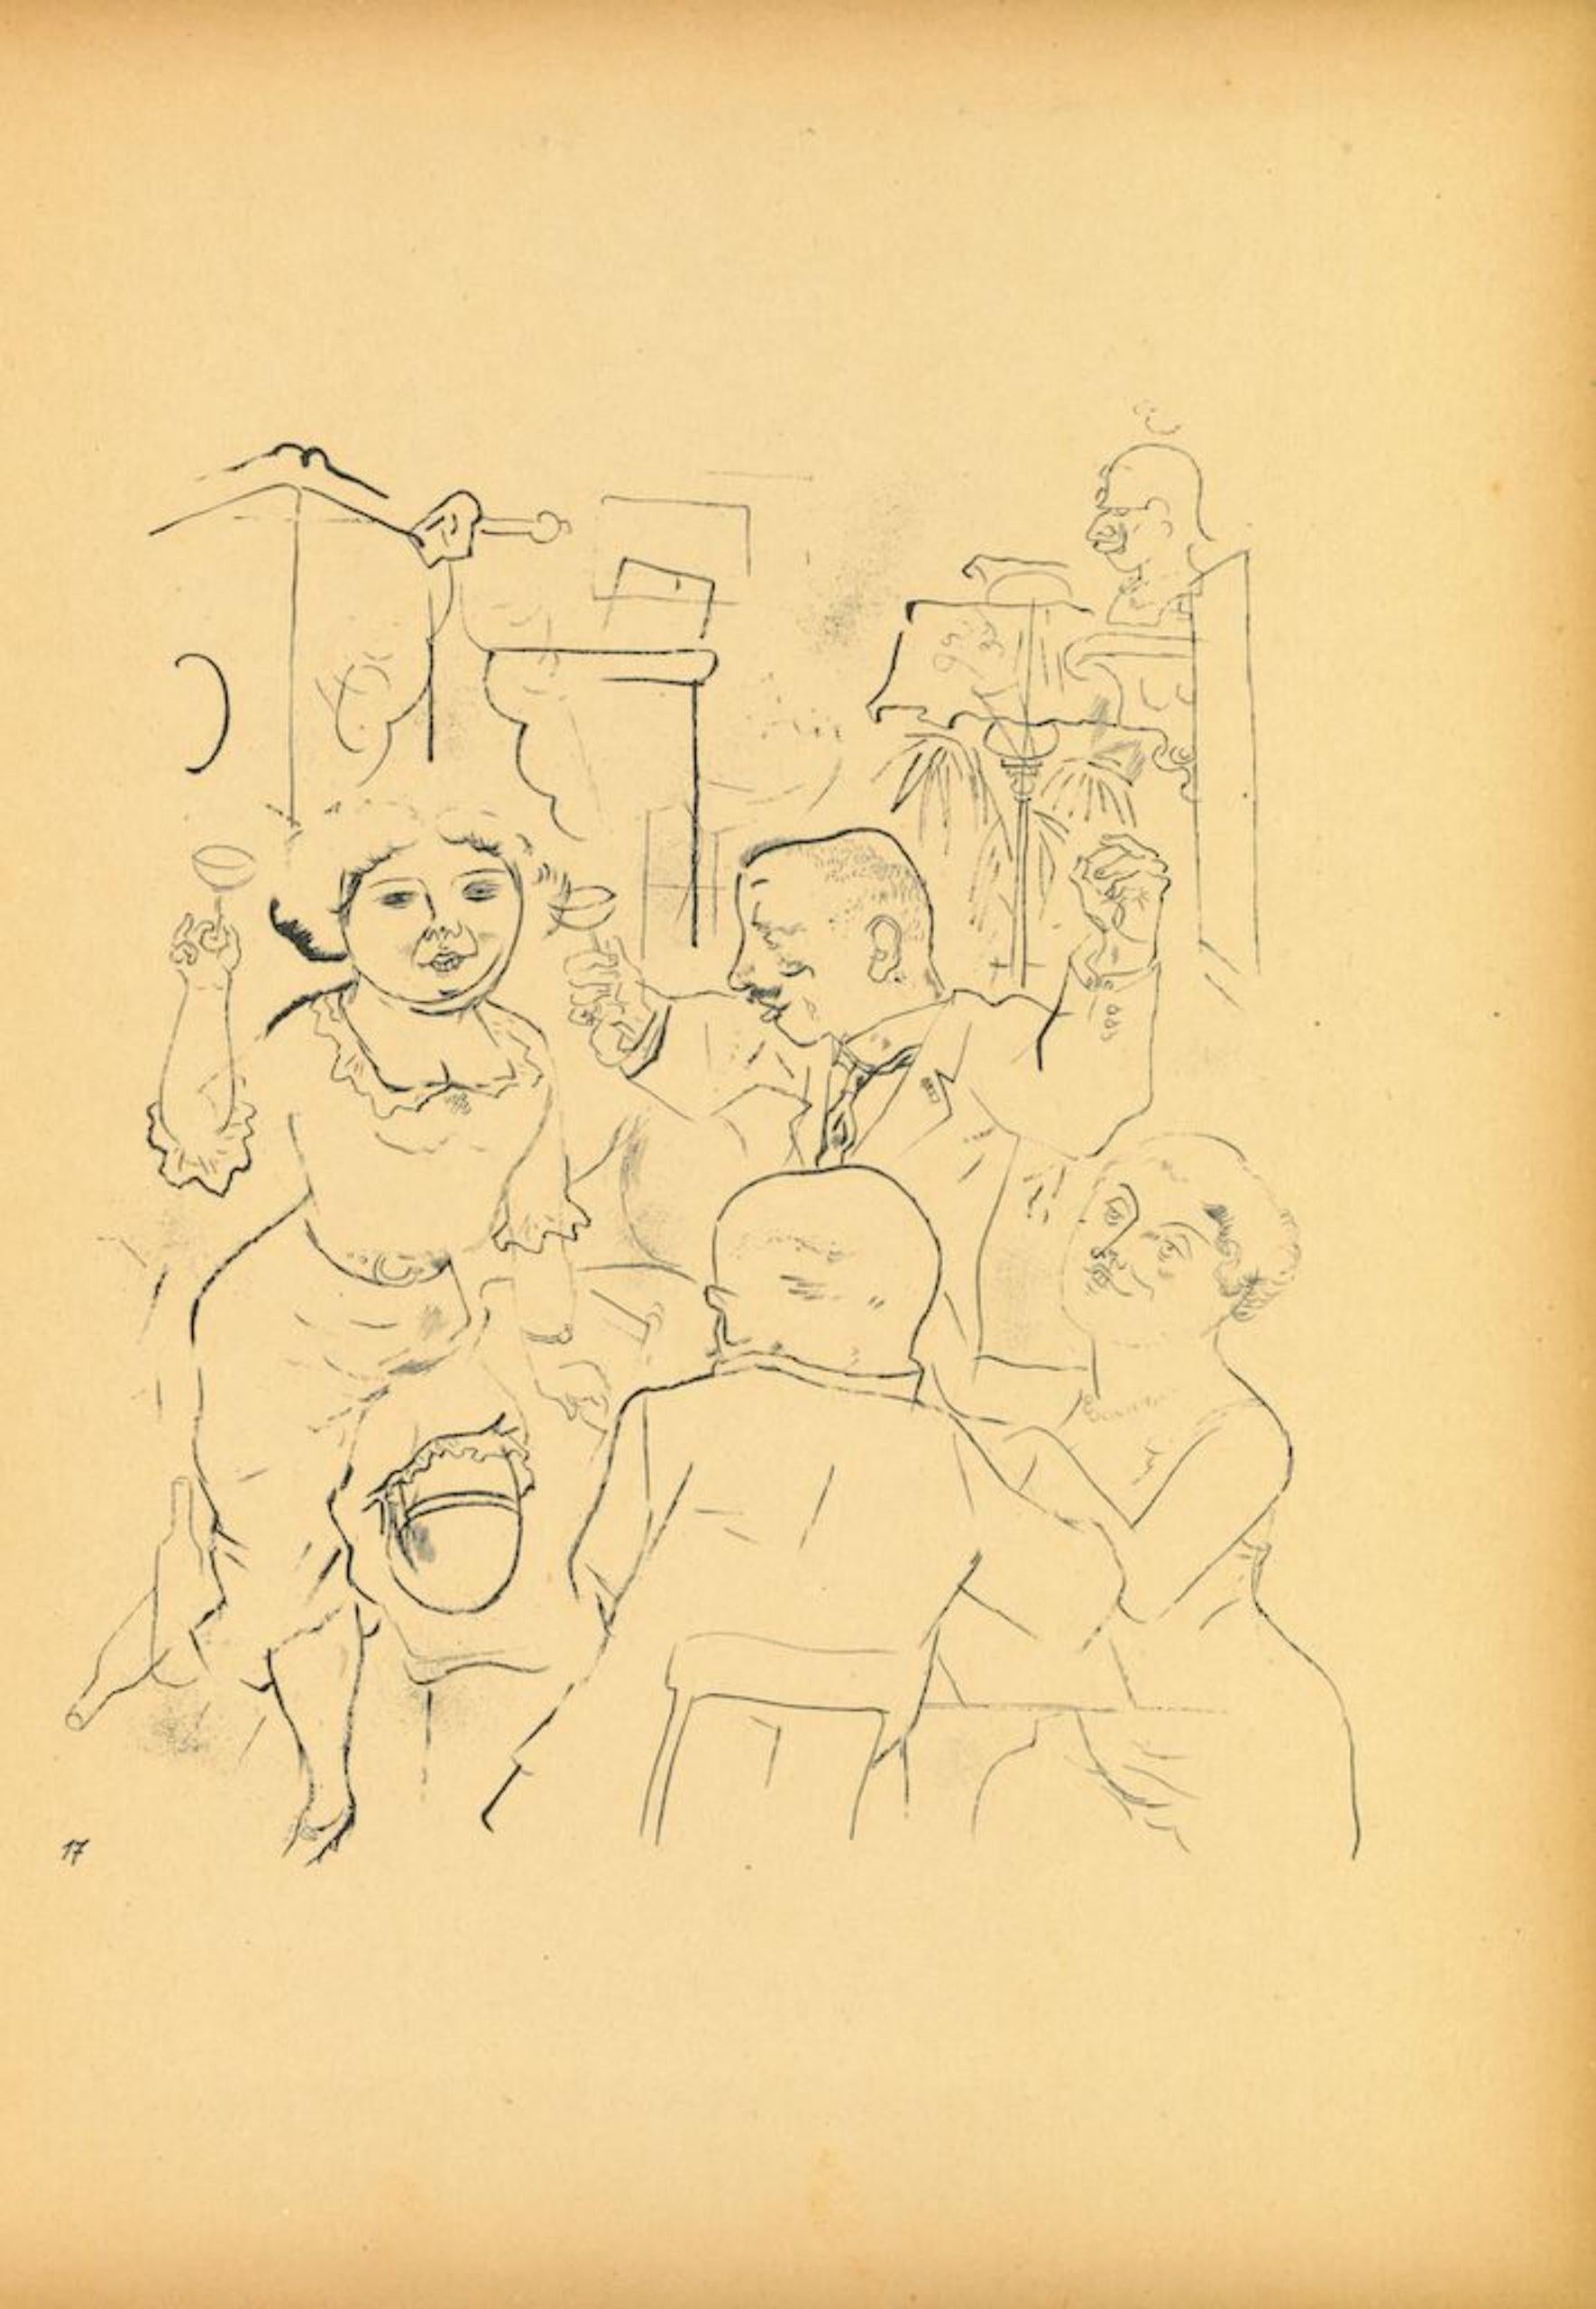 Engagement - Original Lithograph by George Grosz - 1923